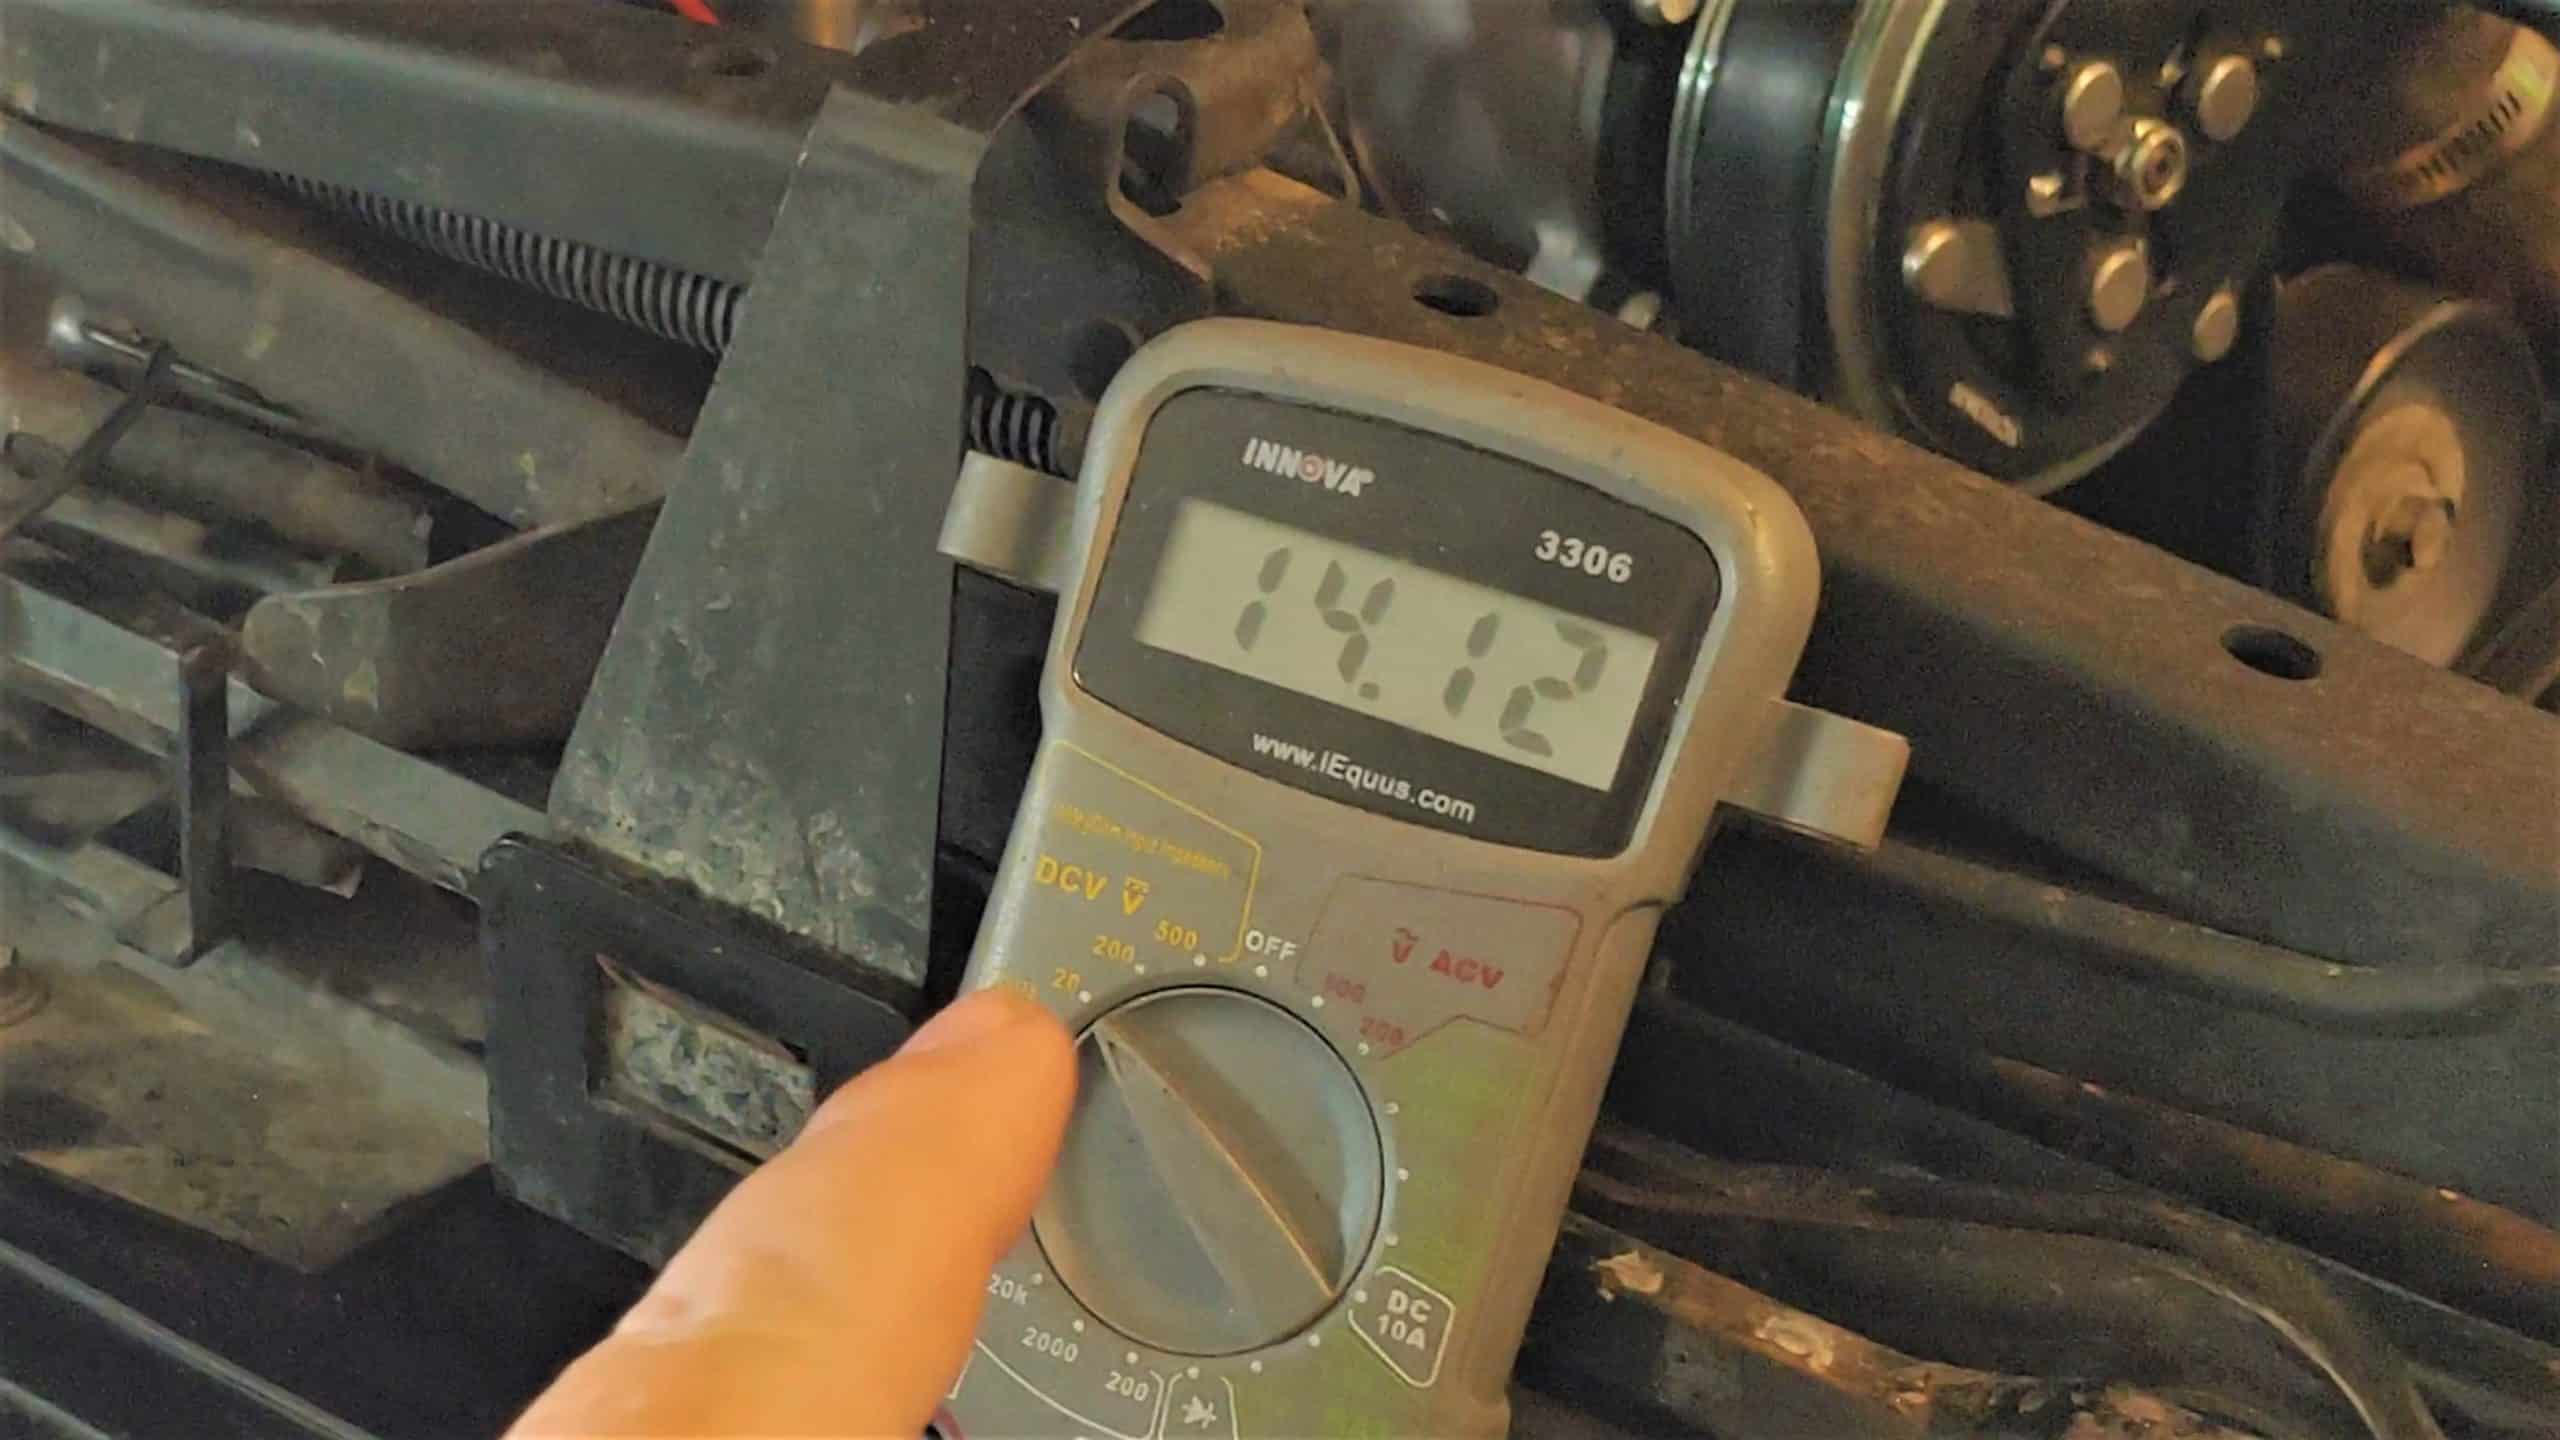 What Alternator Do YouNeed For Your Amp And Winch - Chris Does What